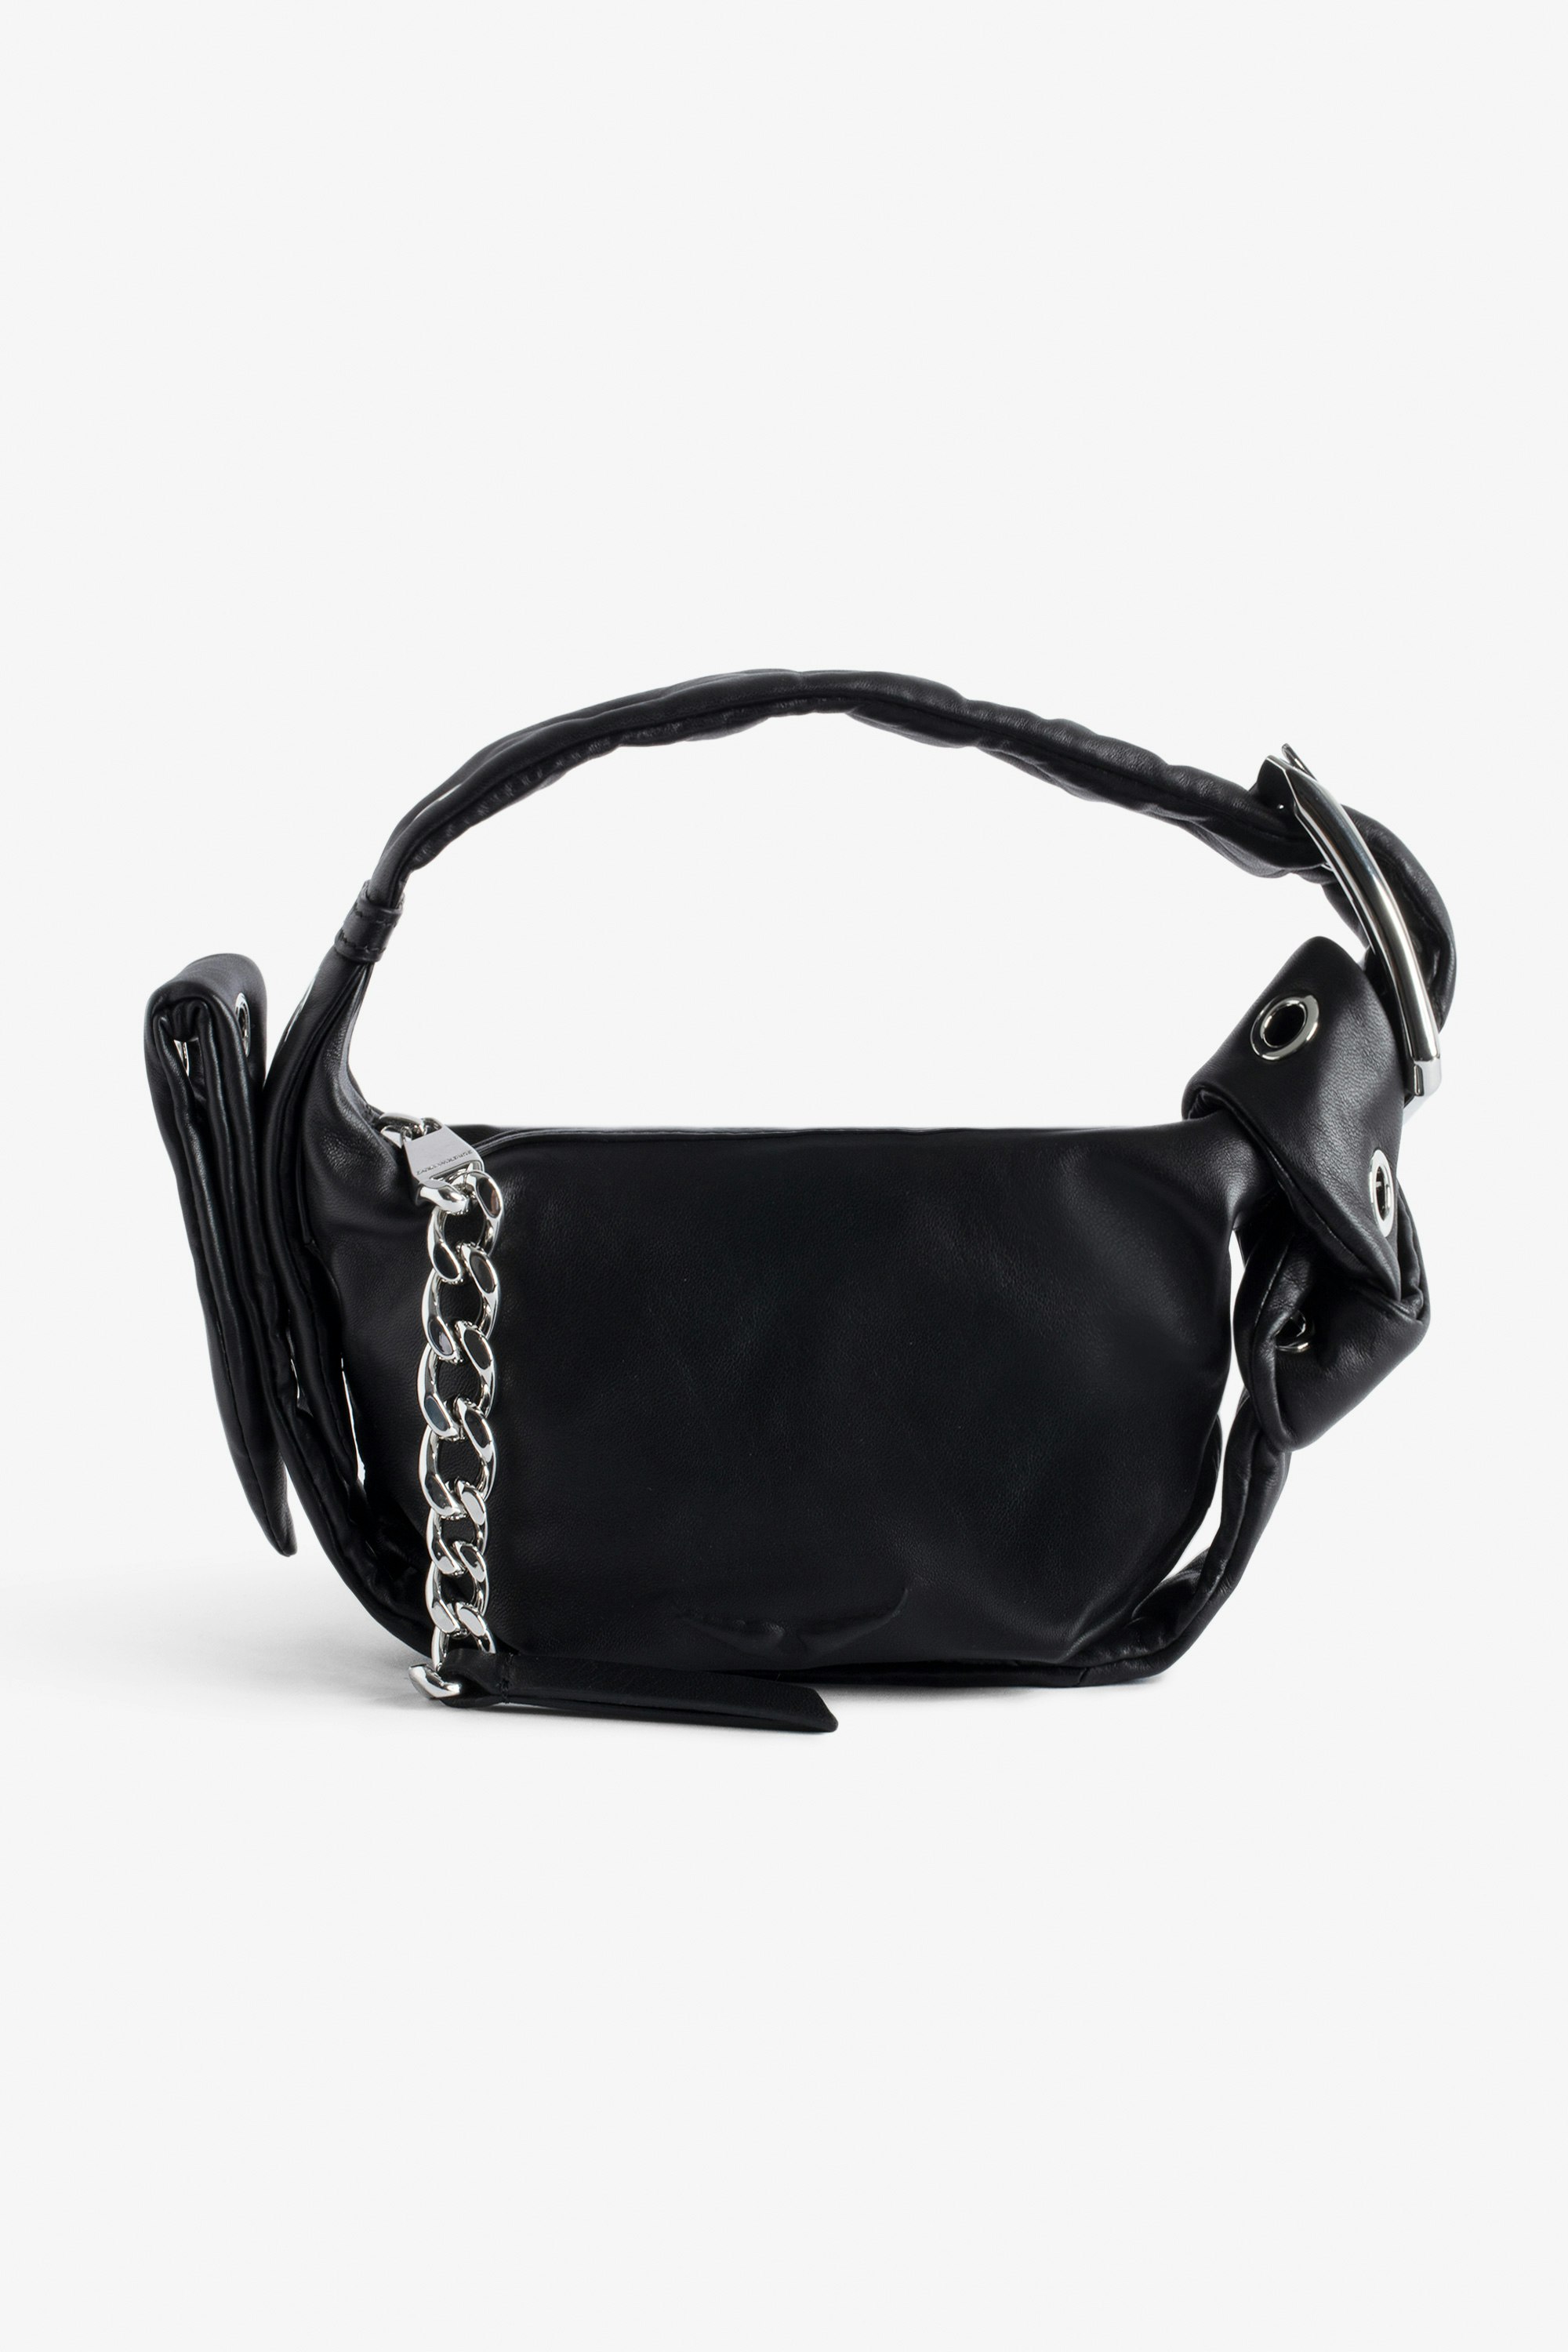 Le Cecilia XS Obsession Bag Women’s small black smooth leather bag with shoulder strap and metal C buckle.